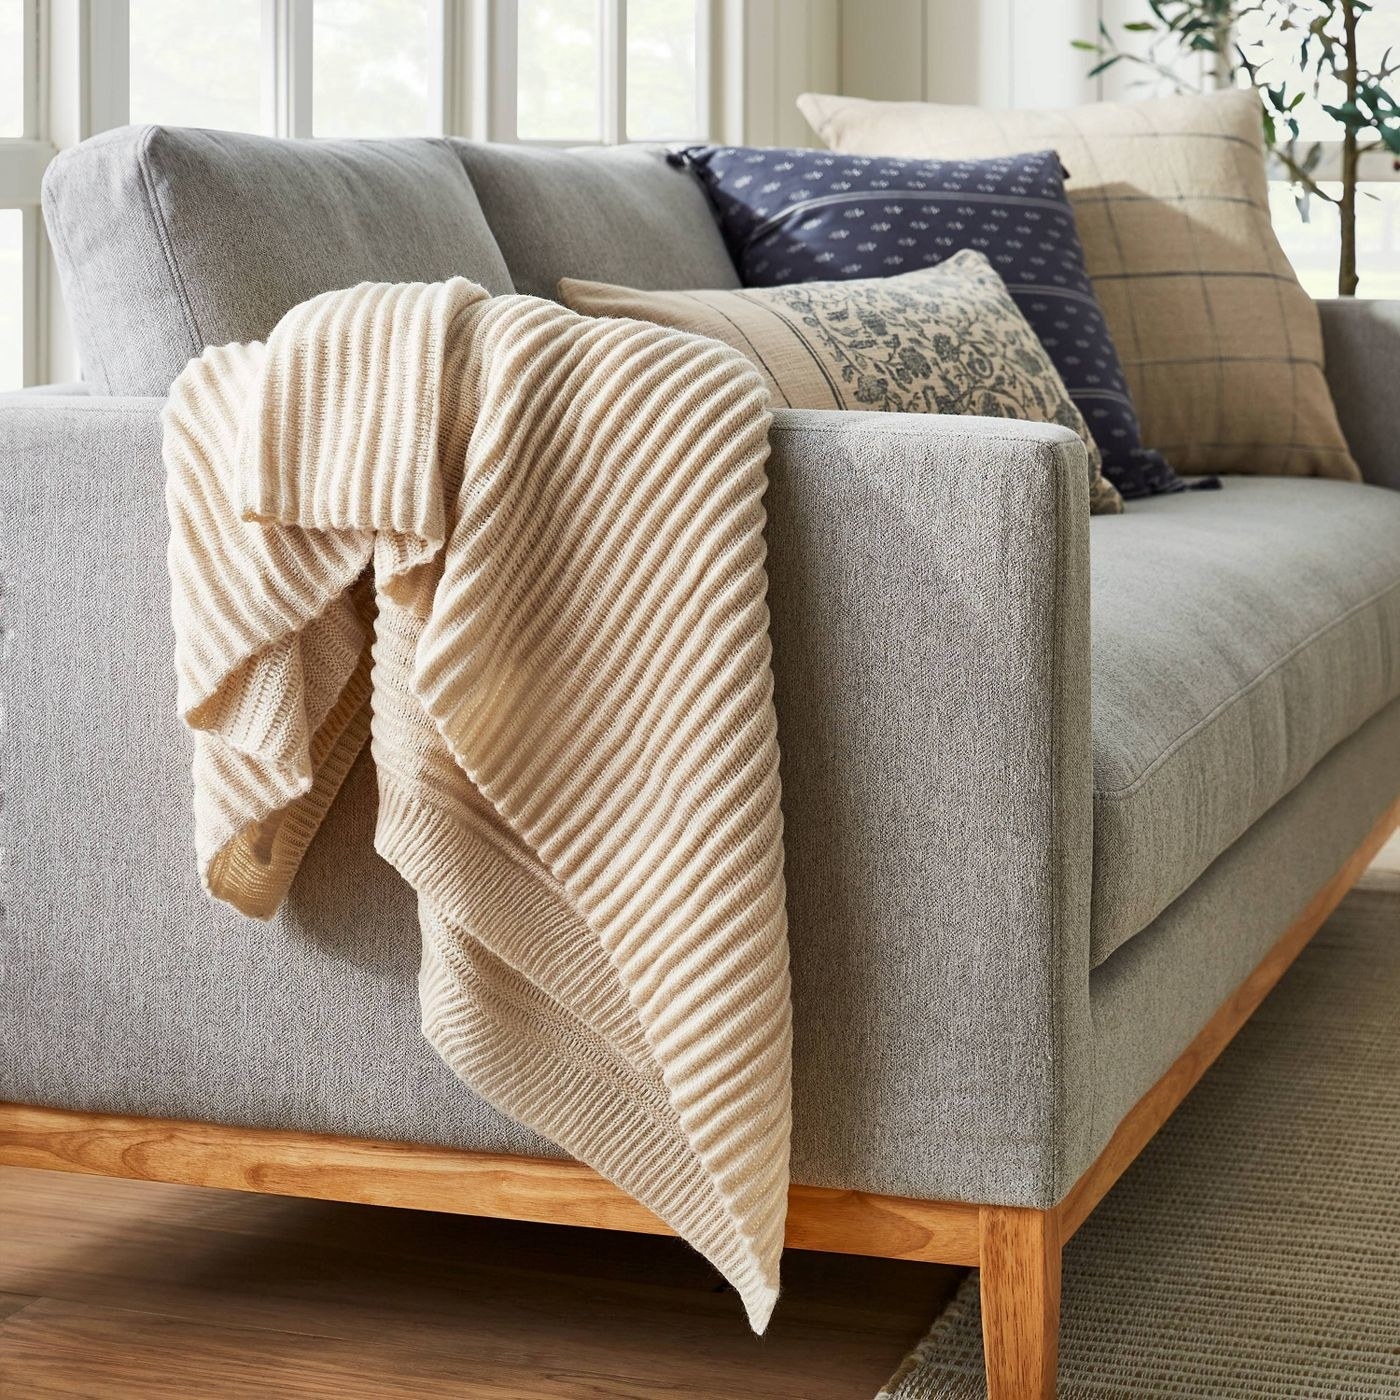 cream colored ribbed knit blanket draped on a couch